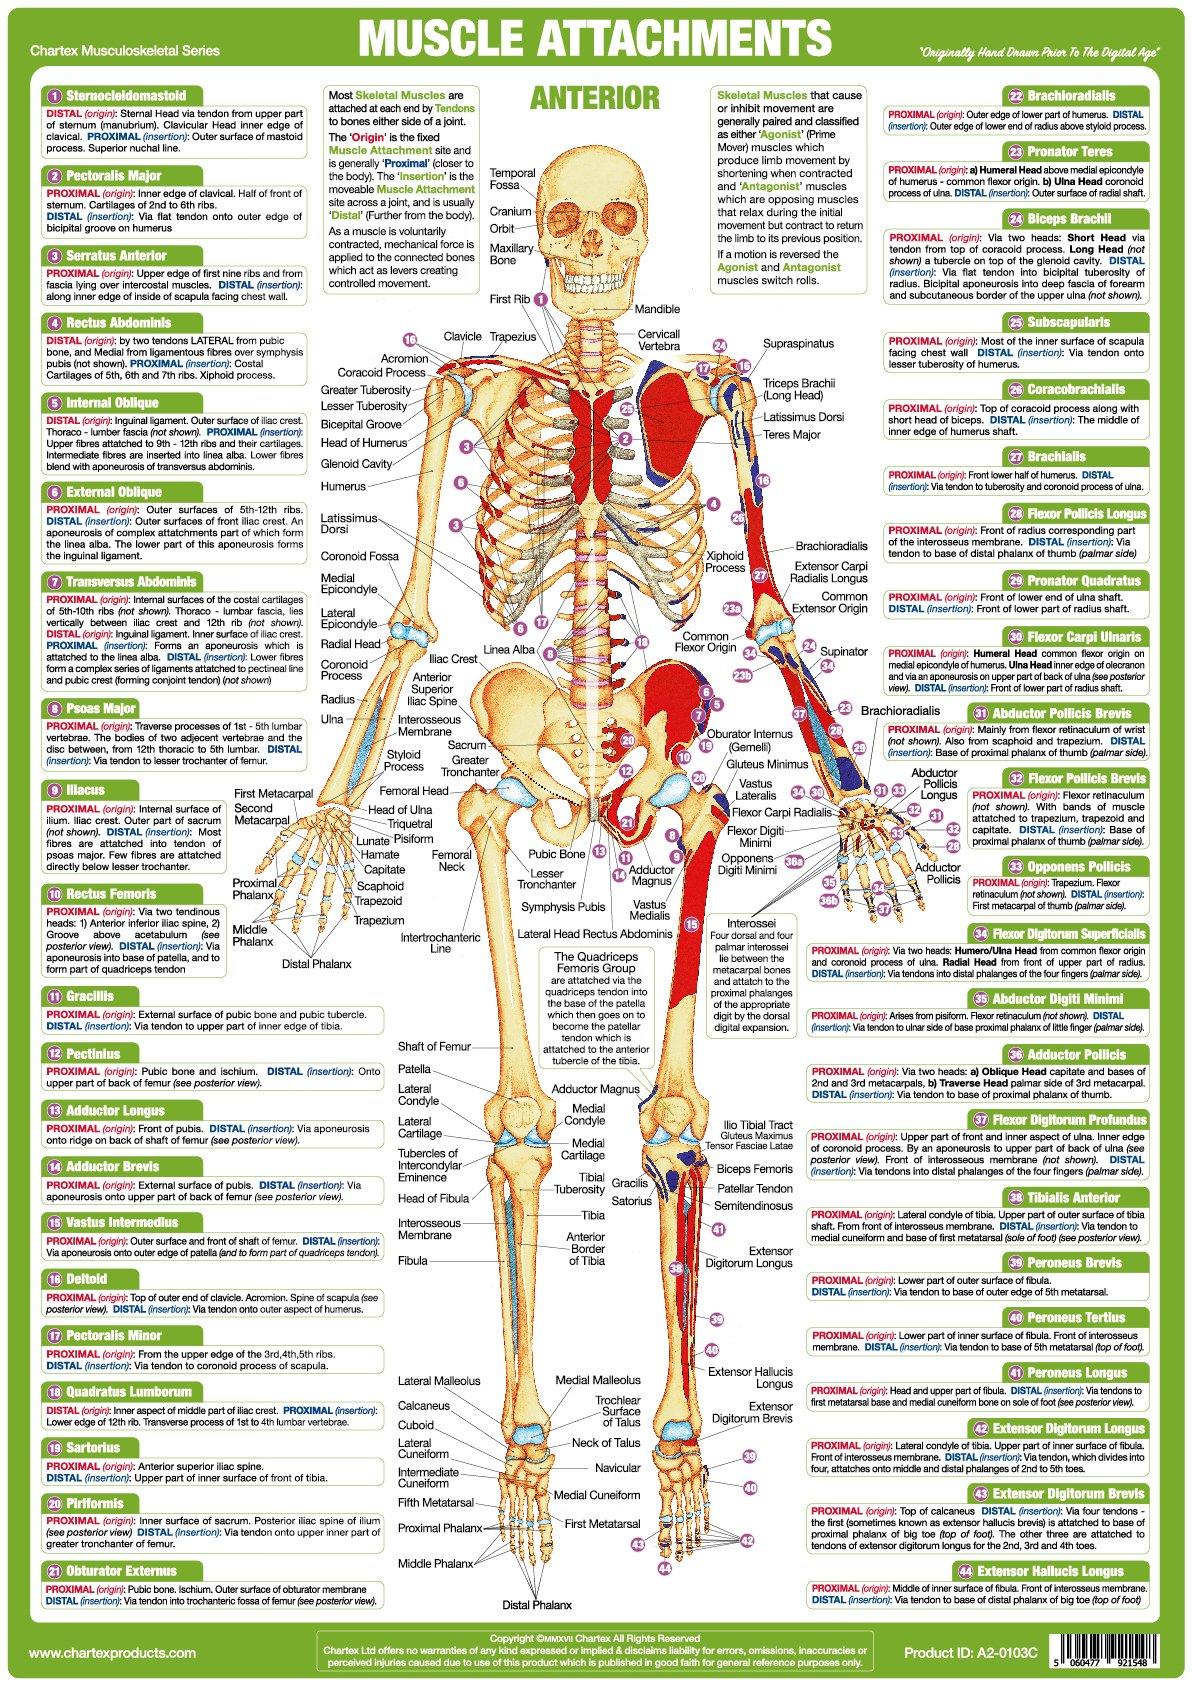 Muscle Attachments Anatomy Chart Anterior